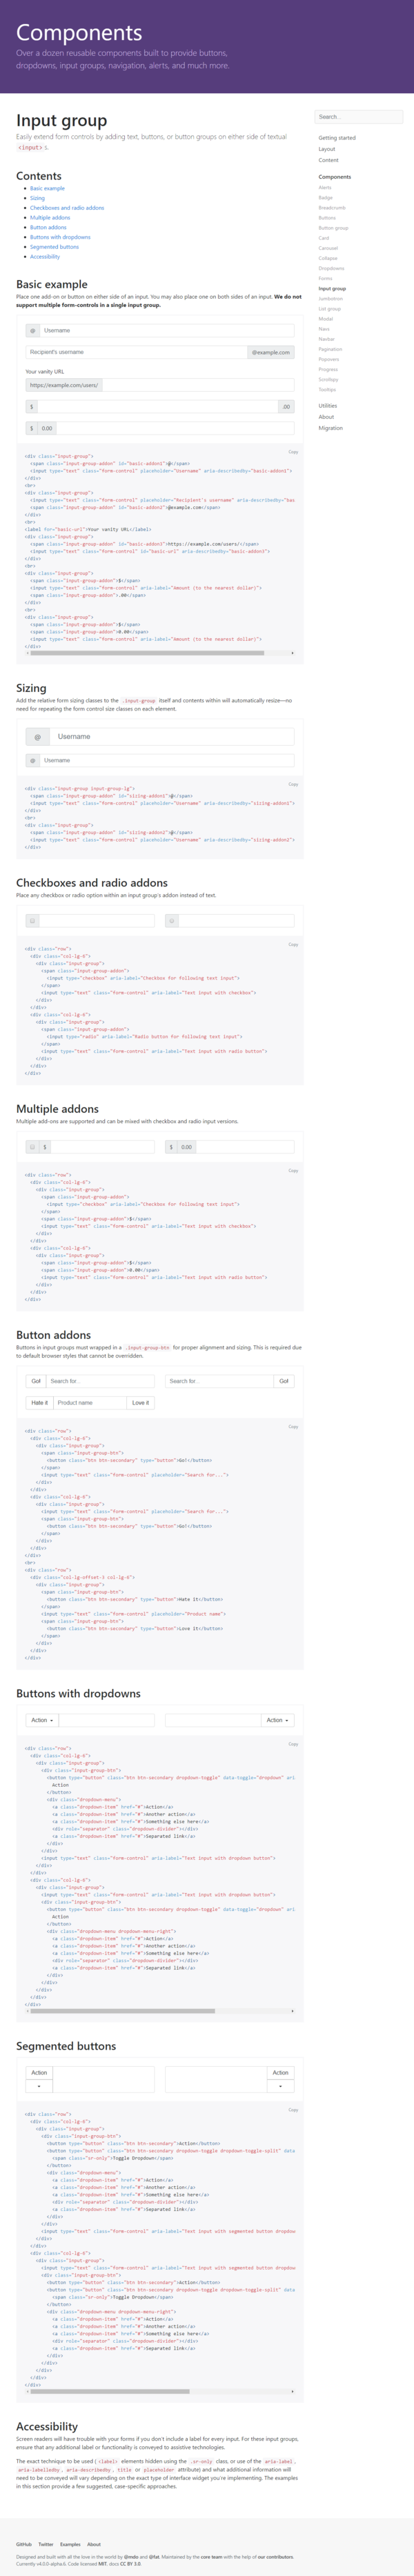 ./20170526-2040-cet-input-grouping-in-bootstrap-1.png